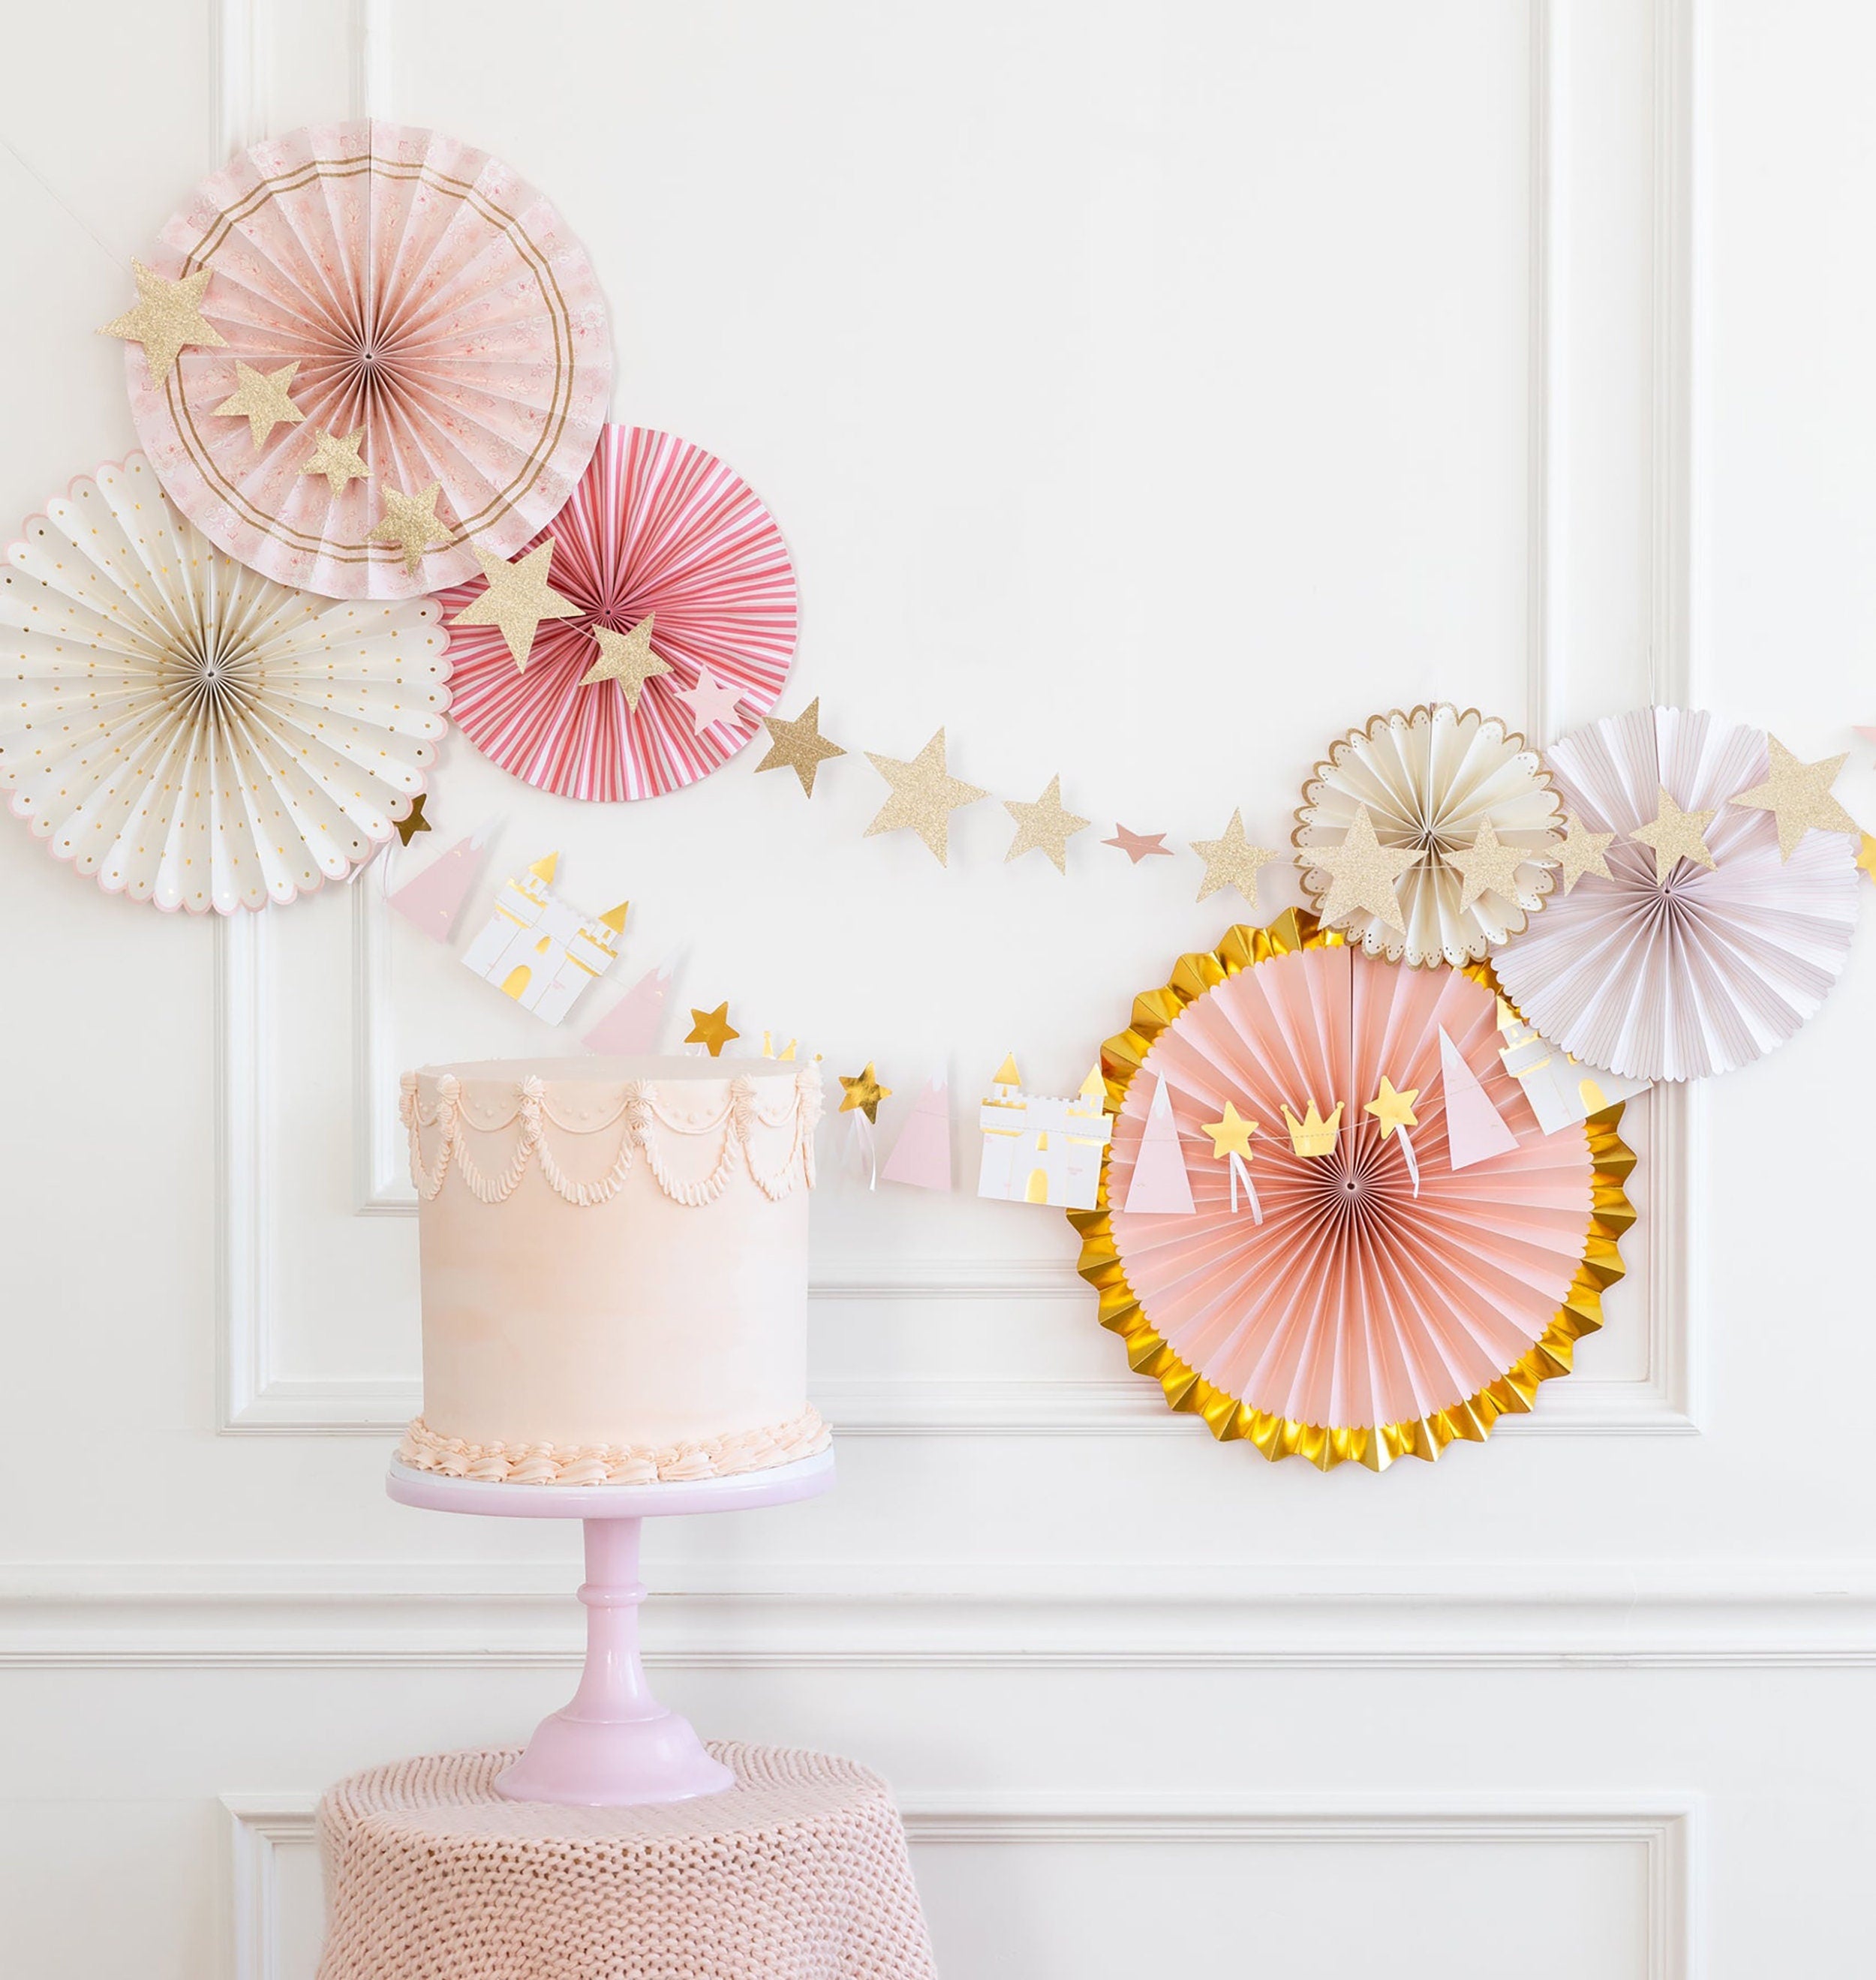 Princess Birthday Party Decorations | Party Fan Decorations - Princess Tea Party  - Pink and Gold Baby Shower - Princess Party Decorations